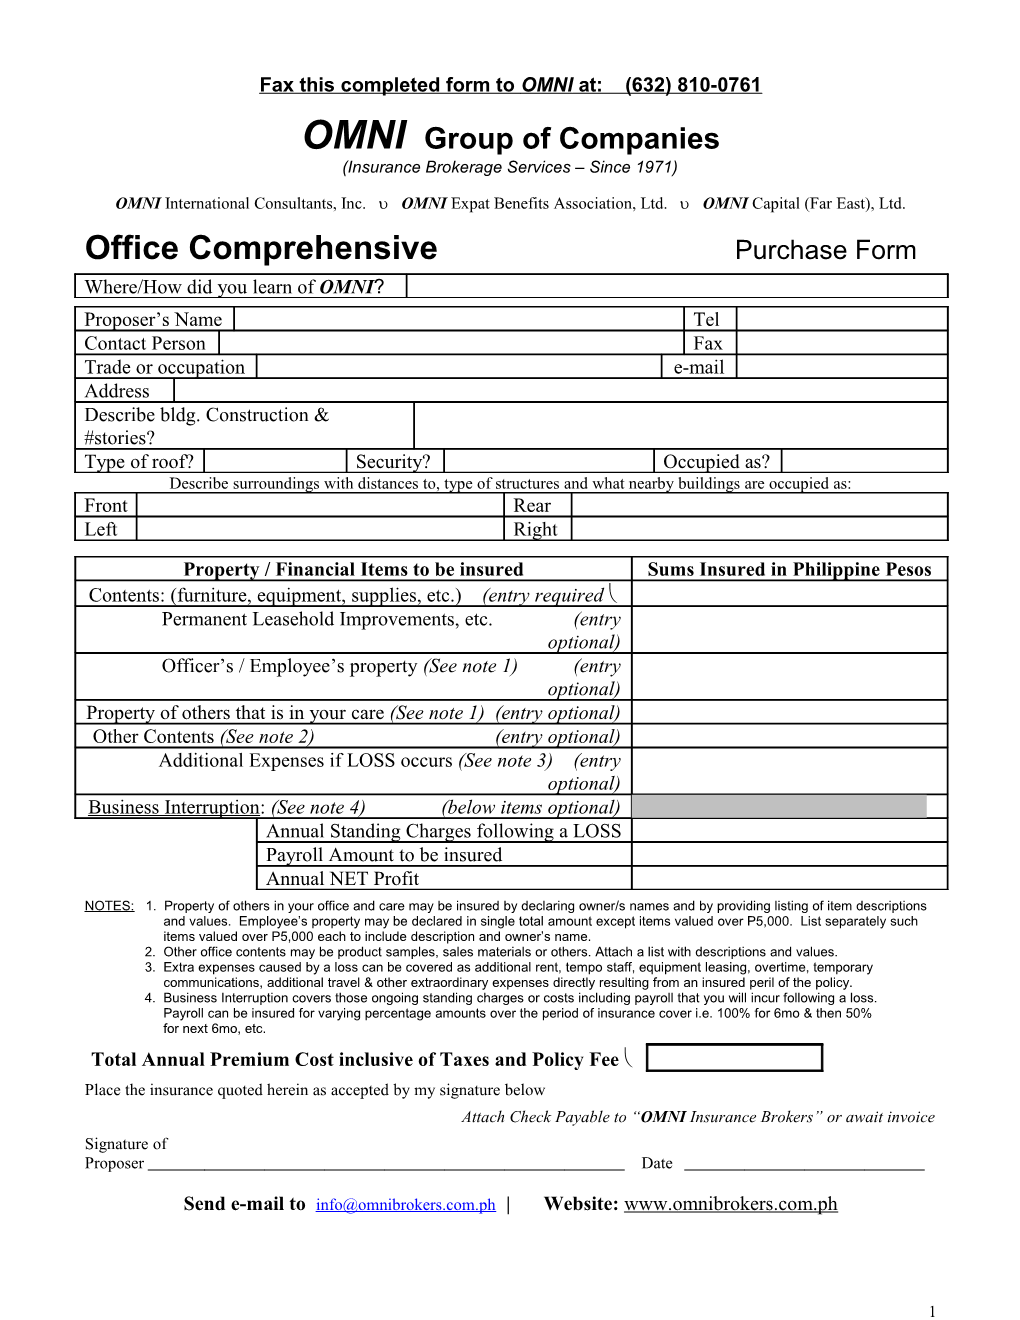 Fax This Completed Form to OMNI At: (632) 810-0761